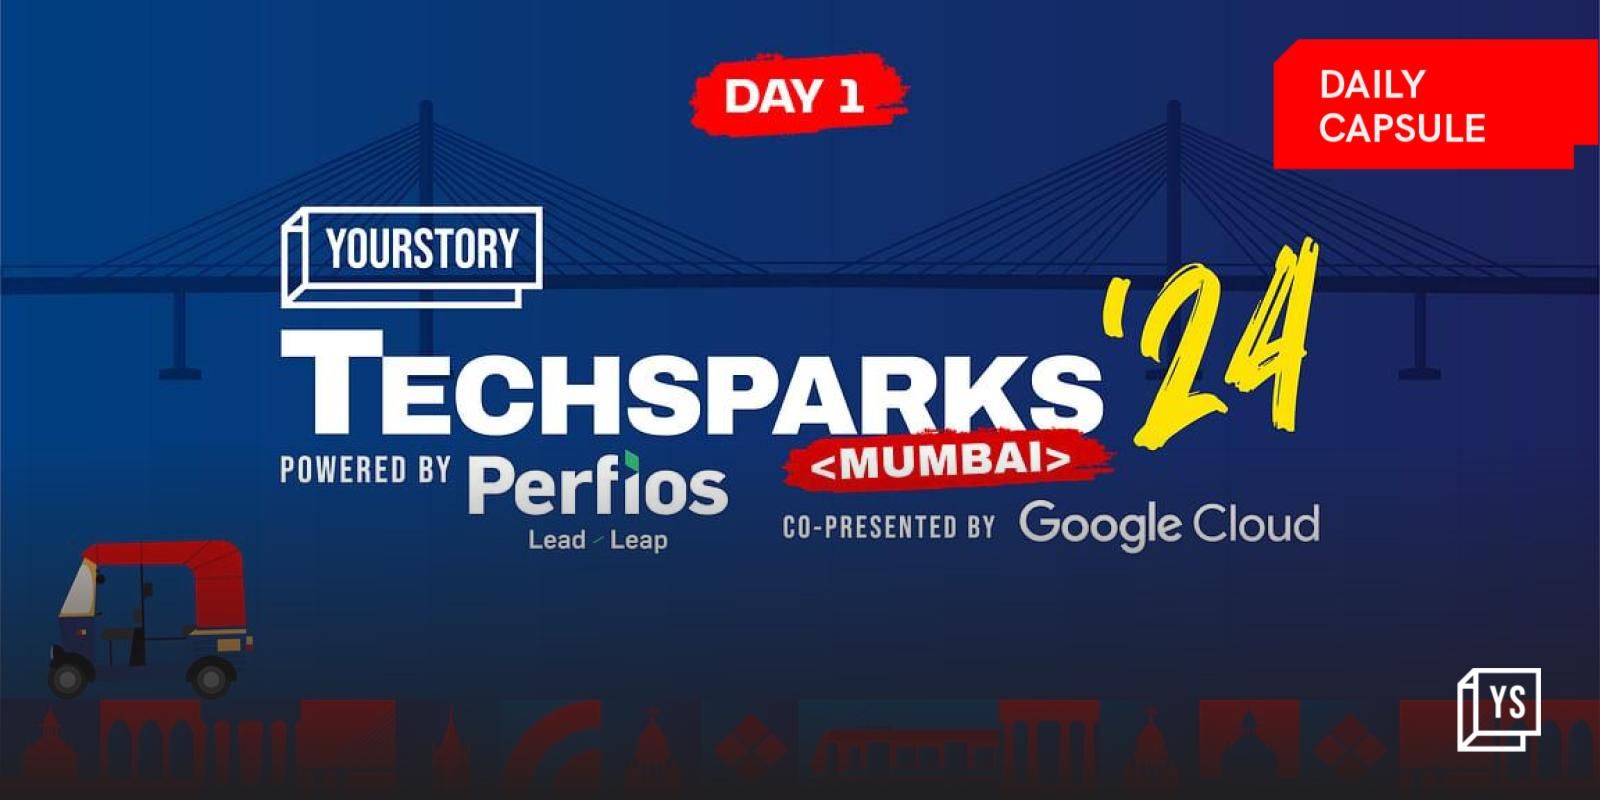 All the action on Day 1 of TechSparks Mumbai